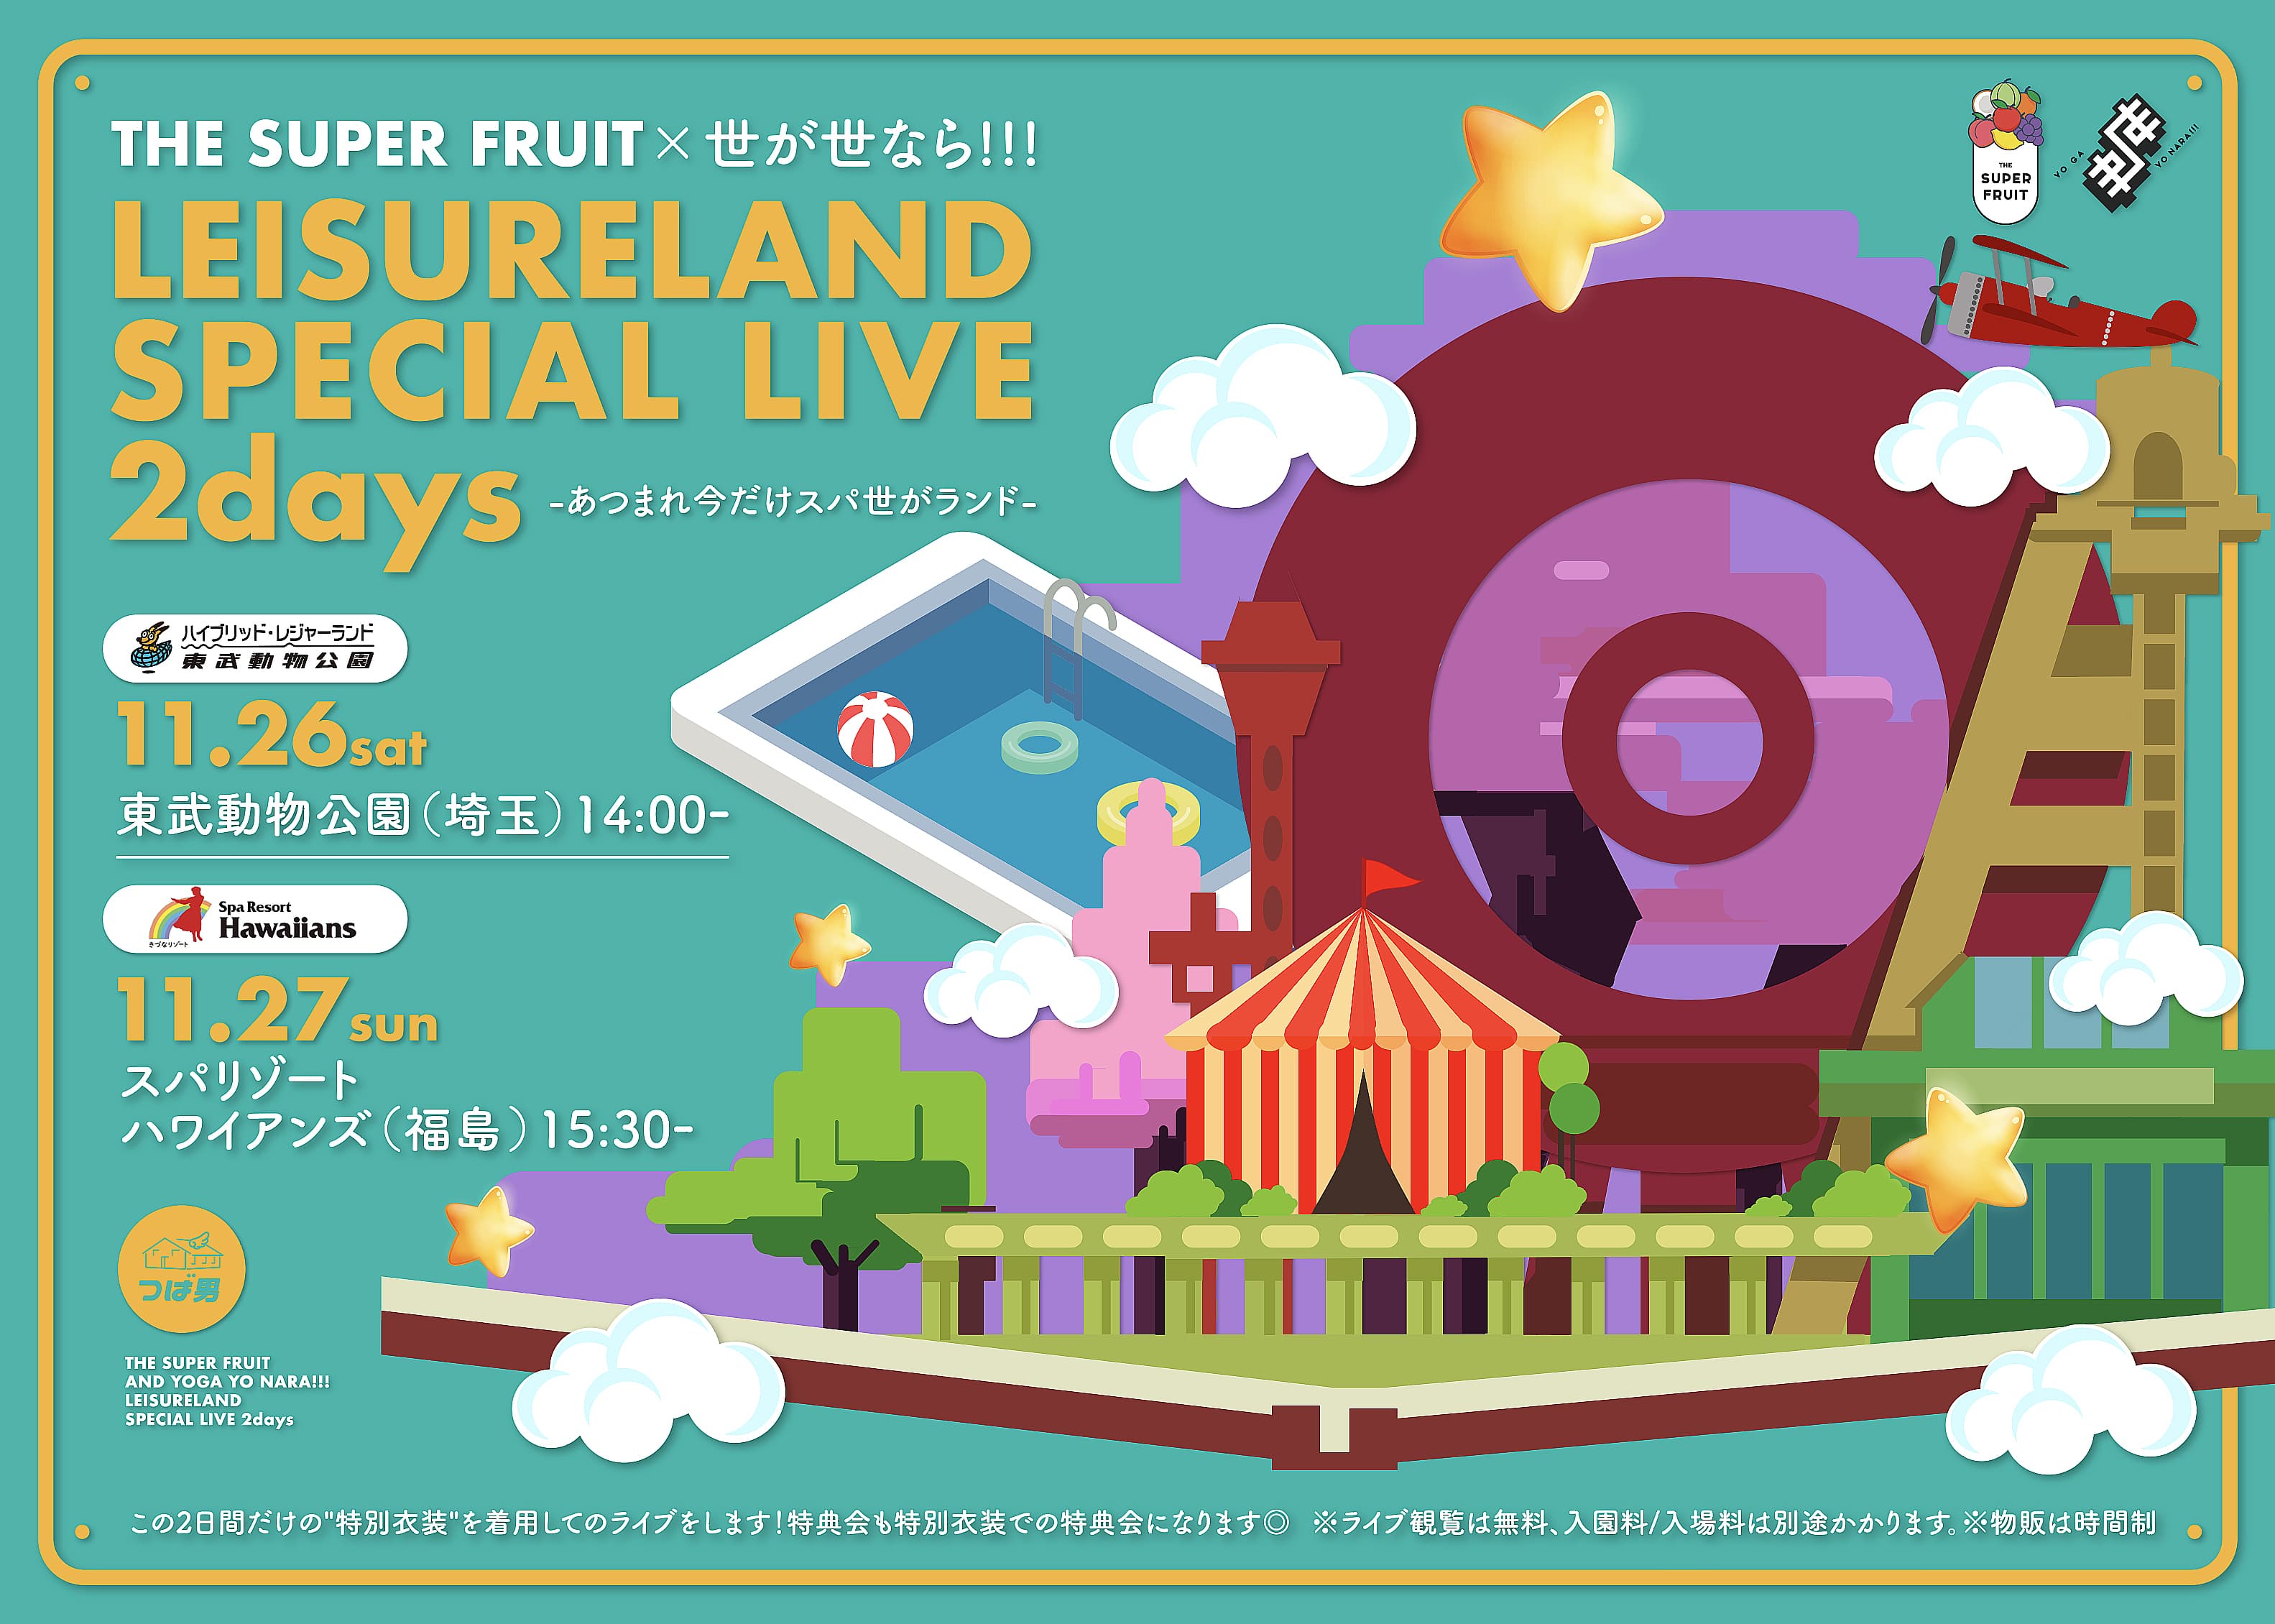 THE SUPER FRUIT × 世が世なら!!! レジャーランドSPECIAL LIVE 2days